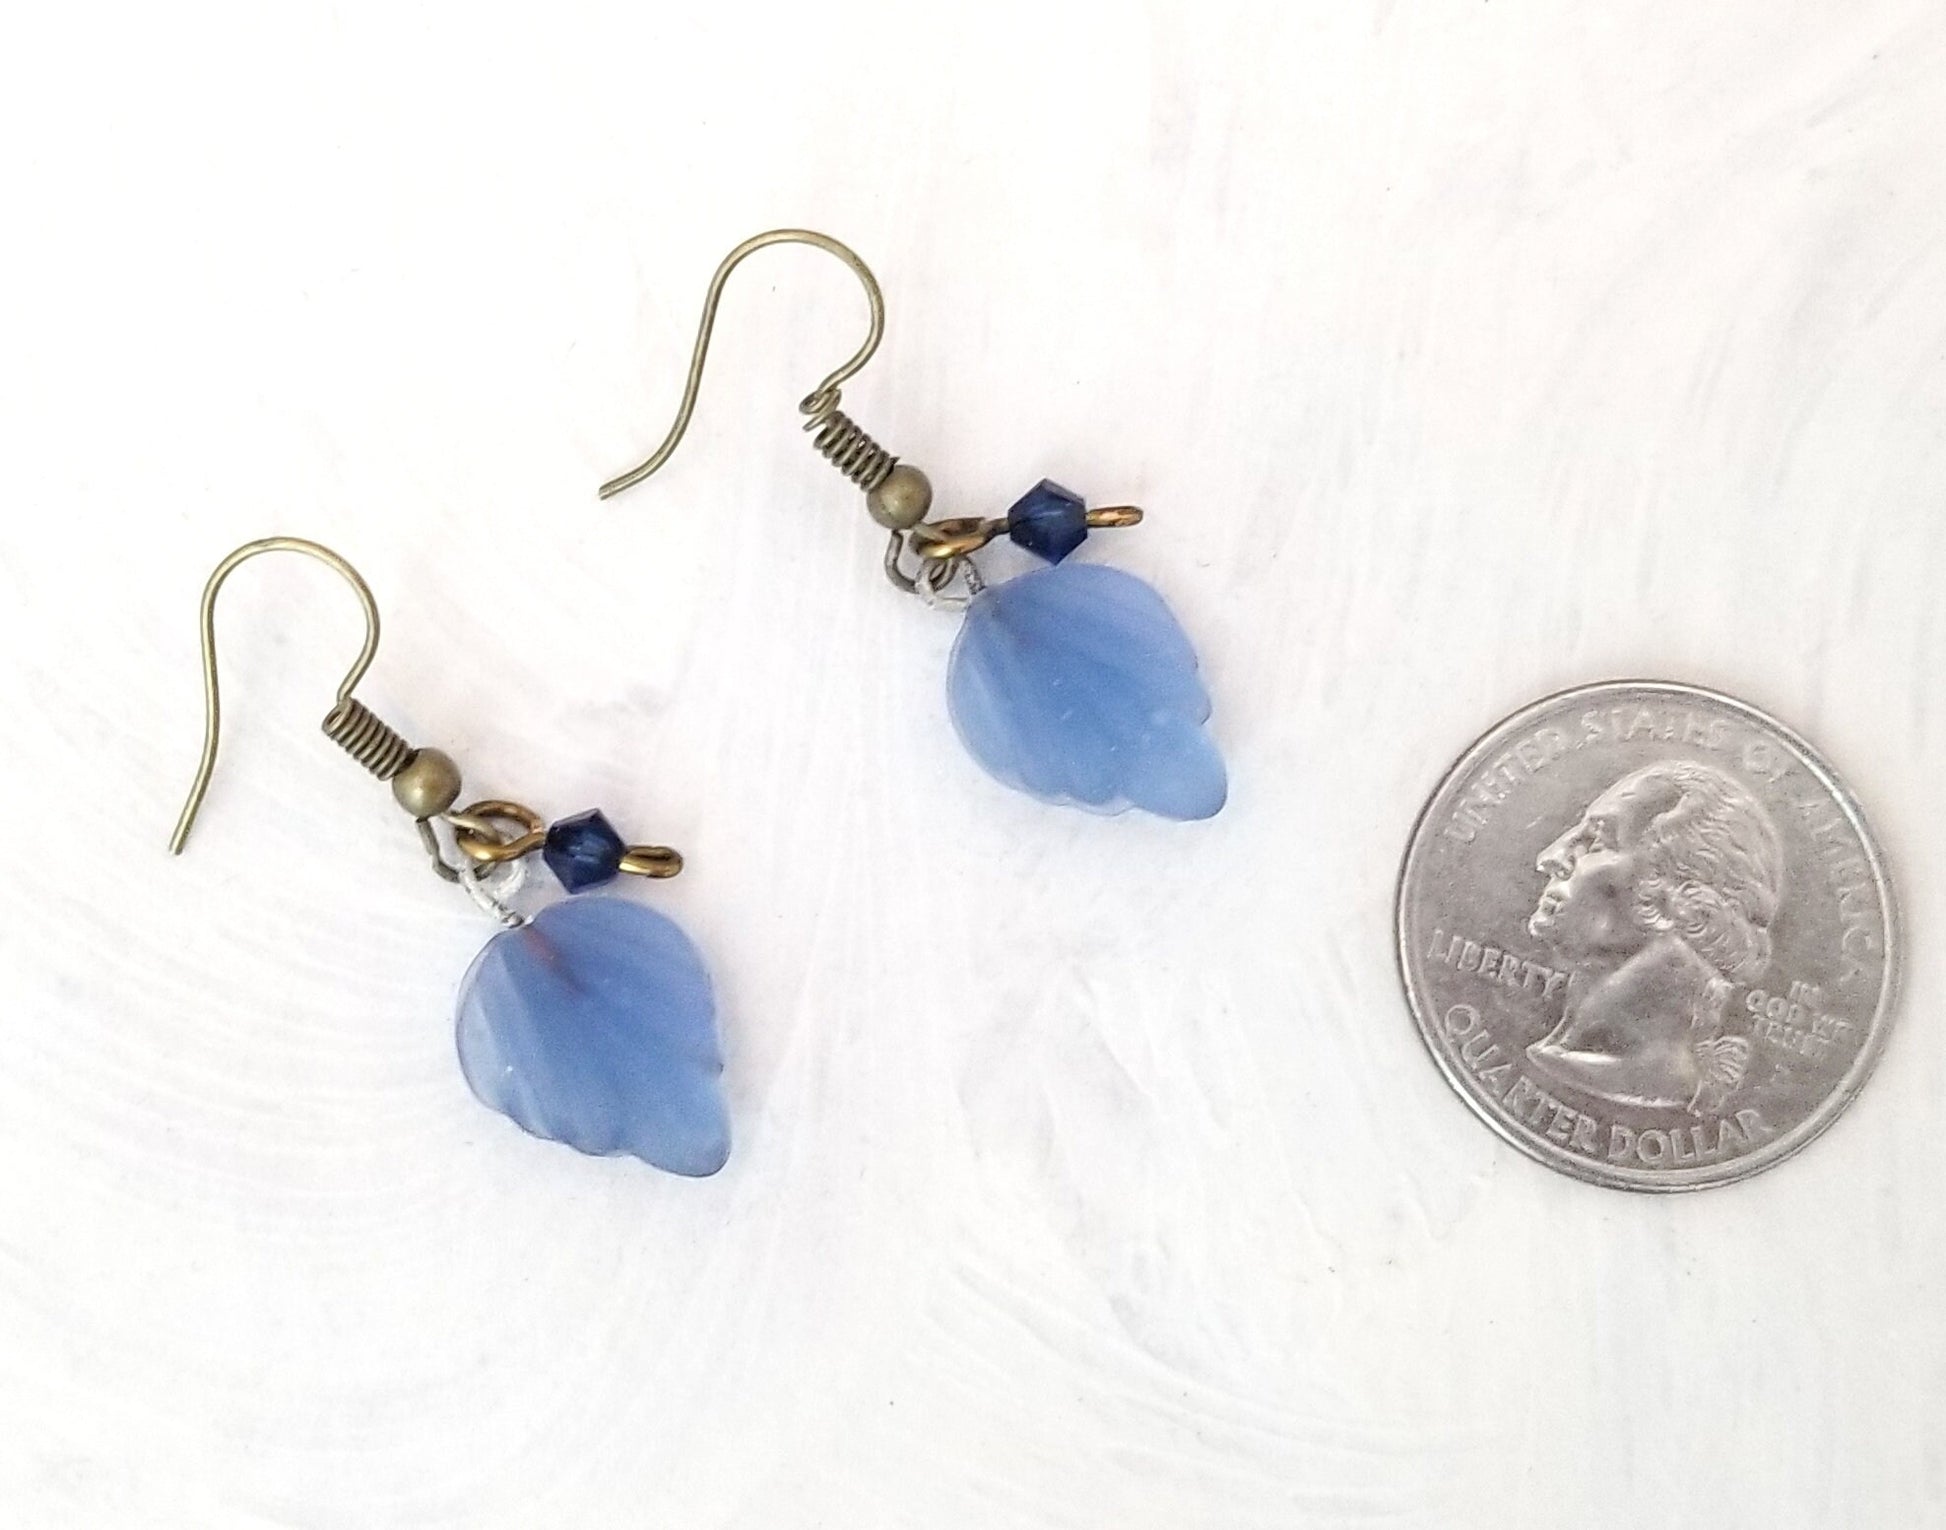 Small Glass Leaf Earrings in Frosted Blue, Wedding, Bridesmaid, Art Nouveau, Renaissance, Belle Epoque, Forest, Choice of Closure Types